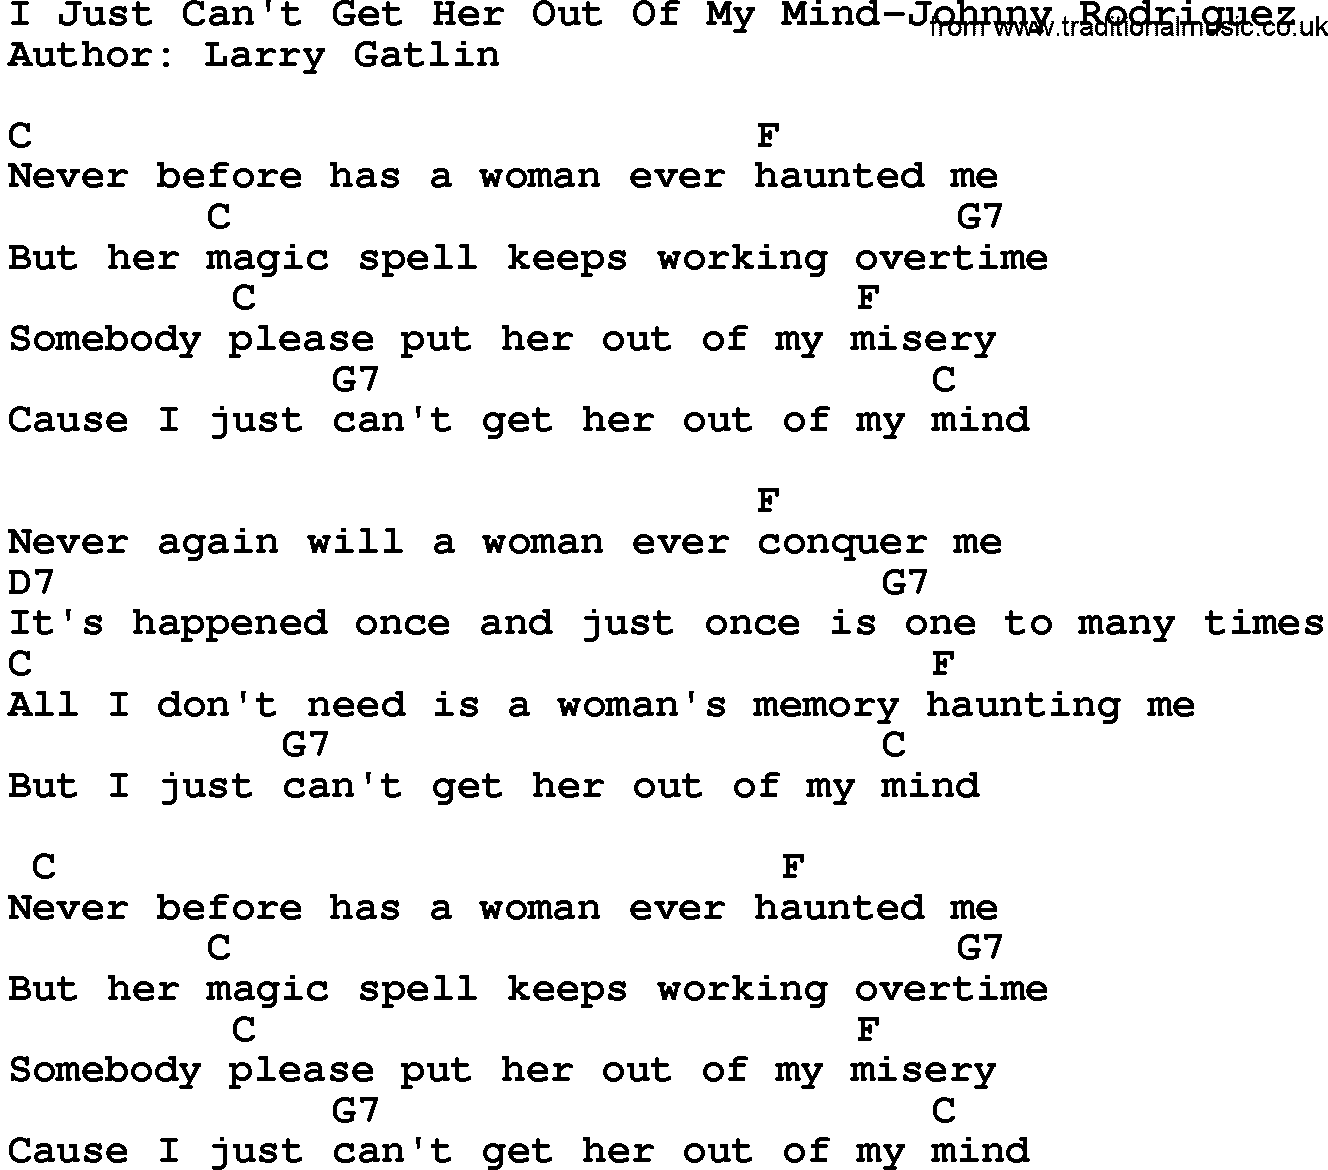 Country music song: I Just Can't Get Her Out Of My Mind-Johnny Rodriguez lyrics and chords